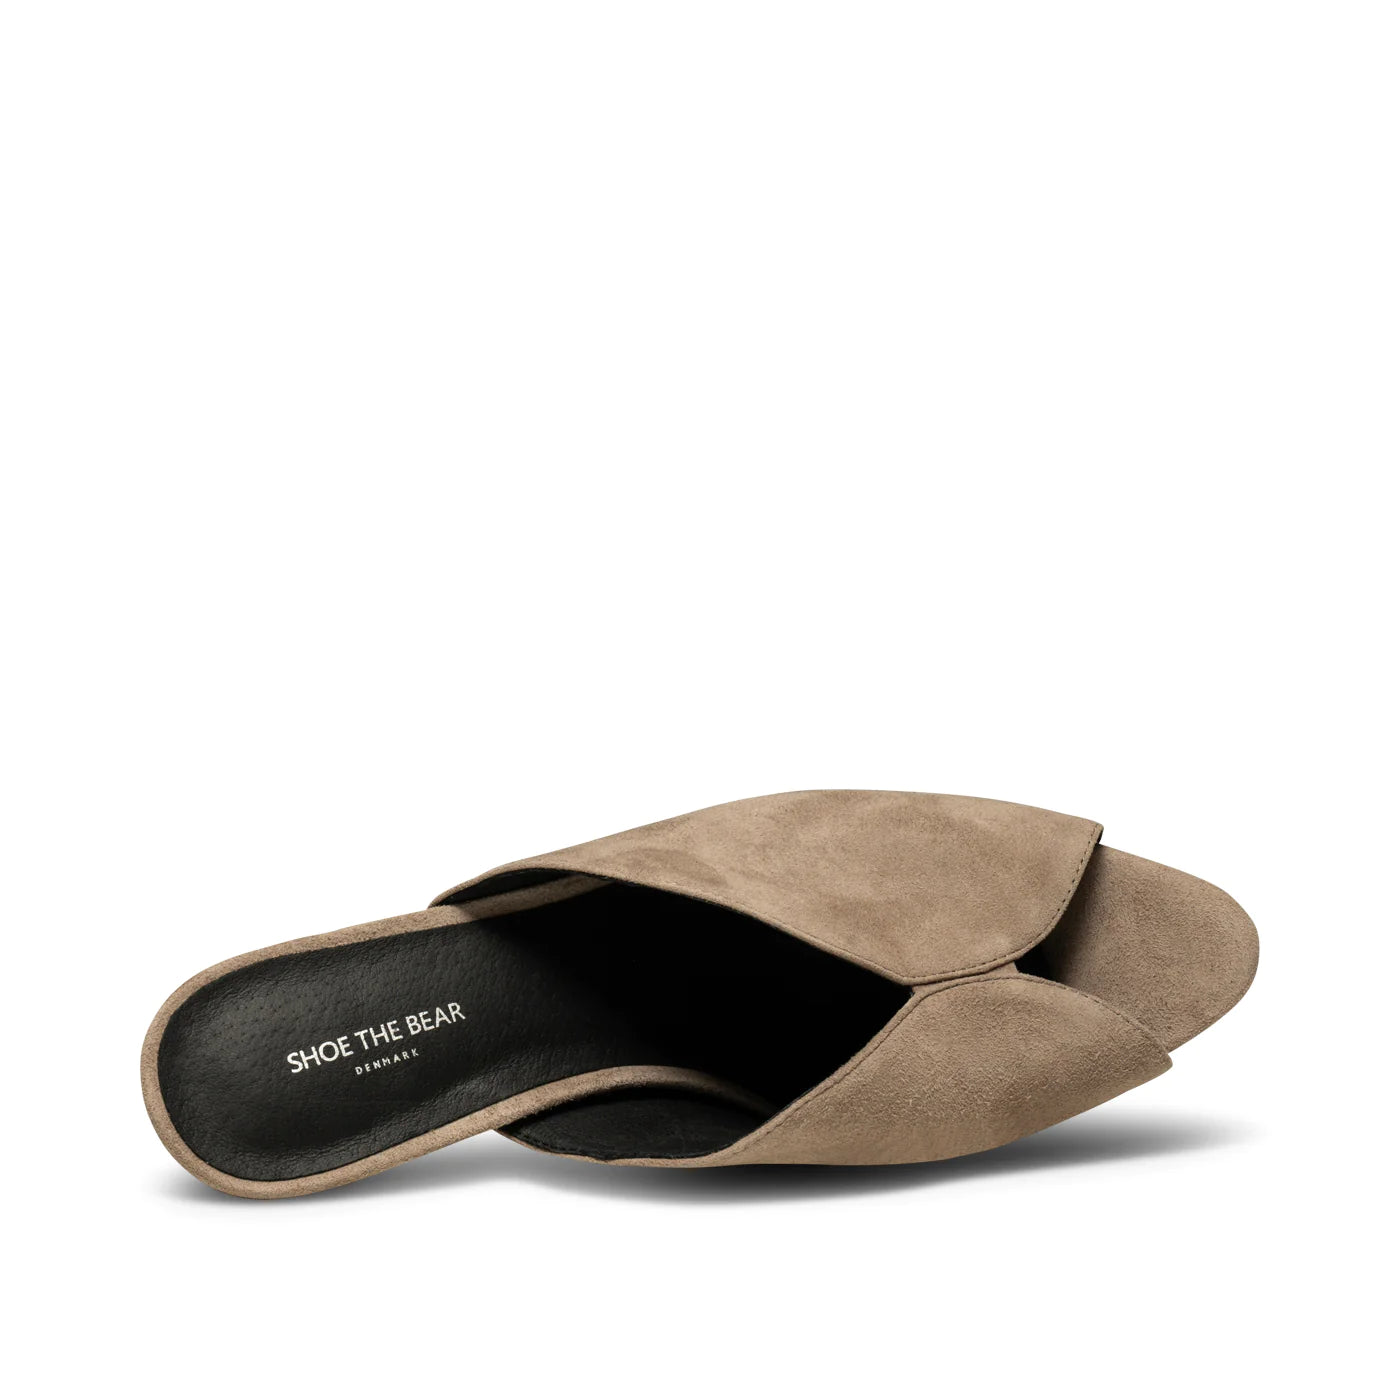 Valentine Sandal in Suede by Shoe The Bear